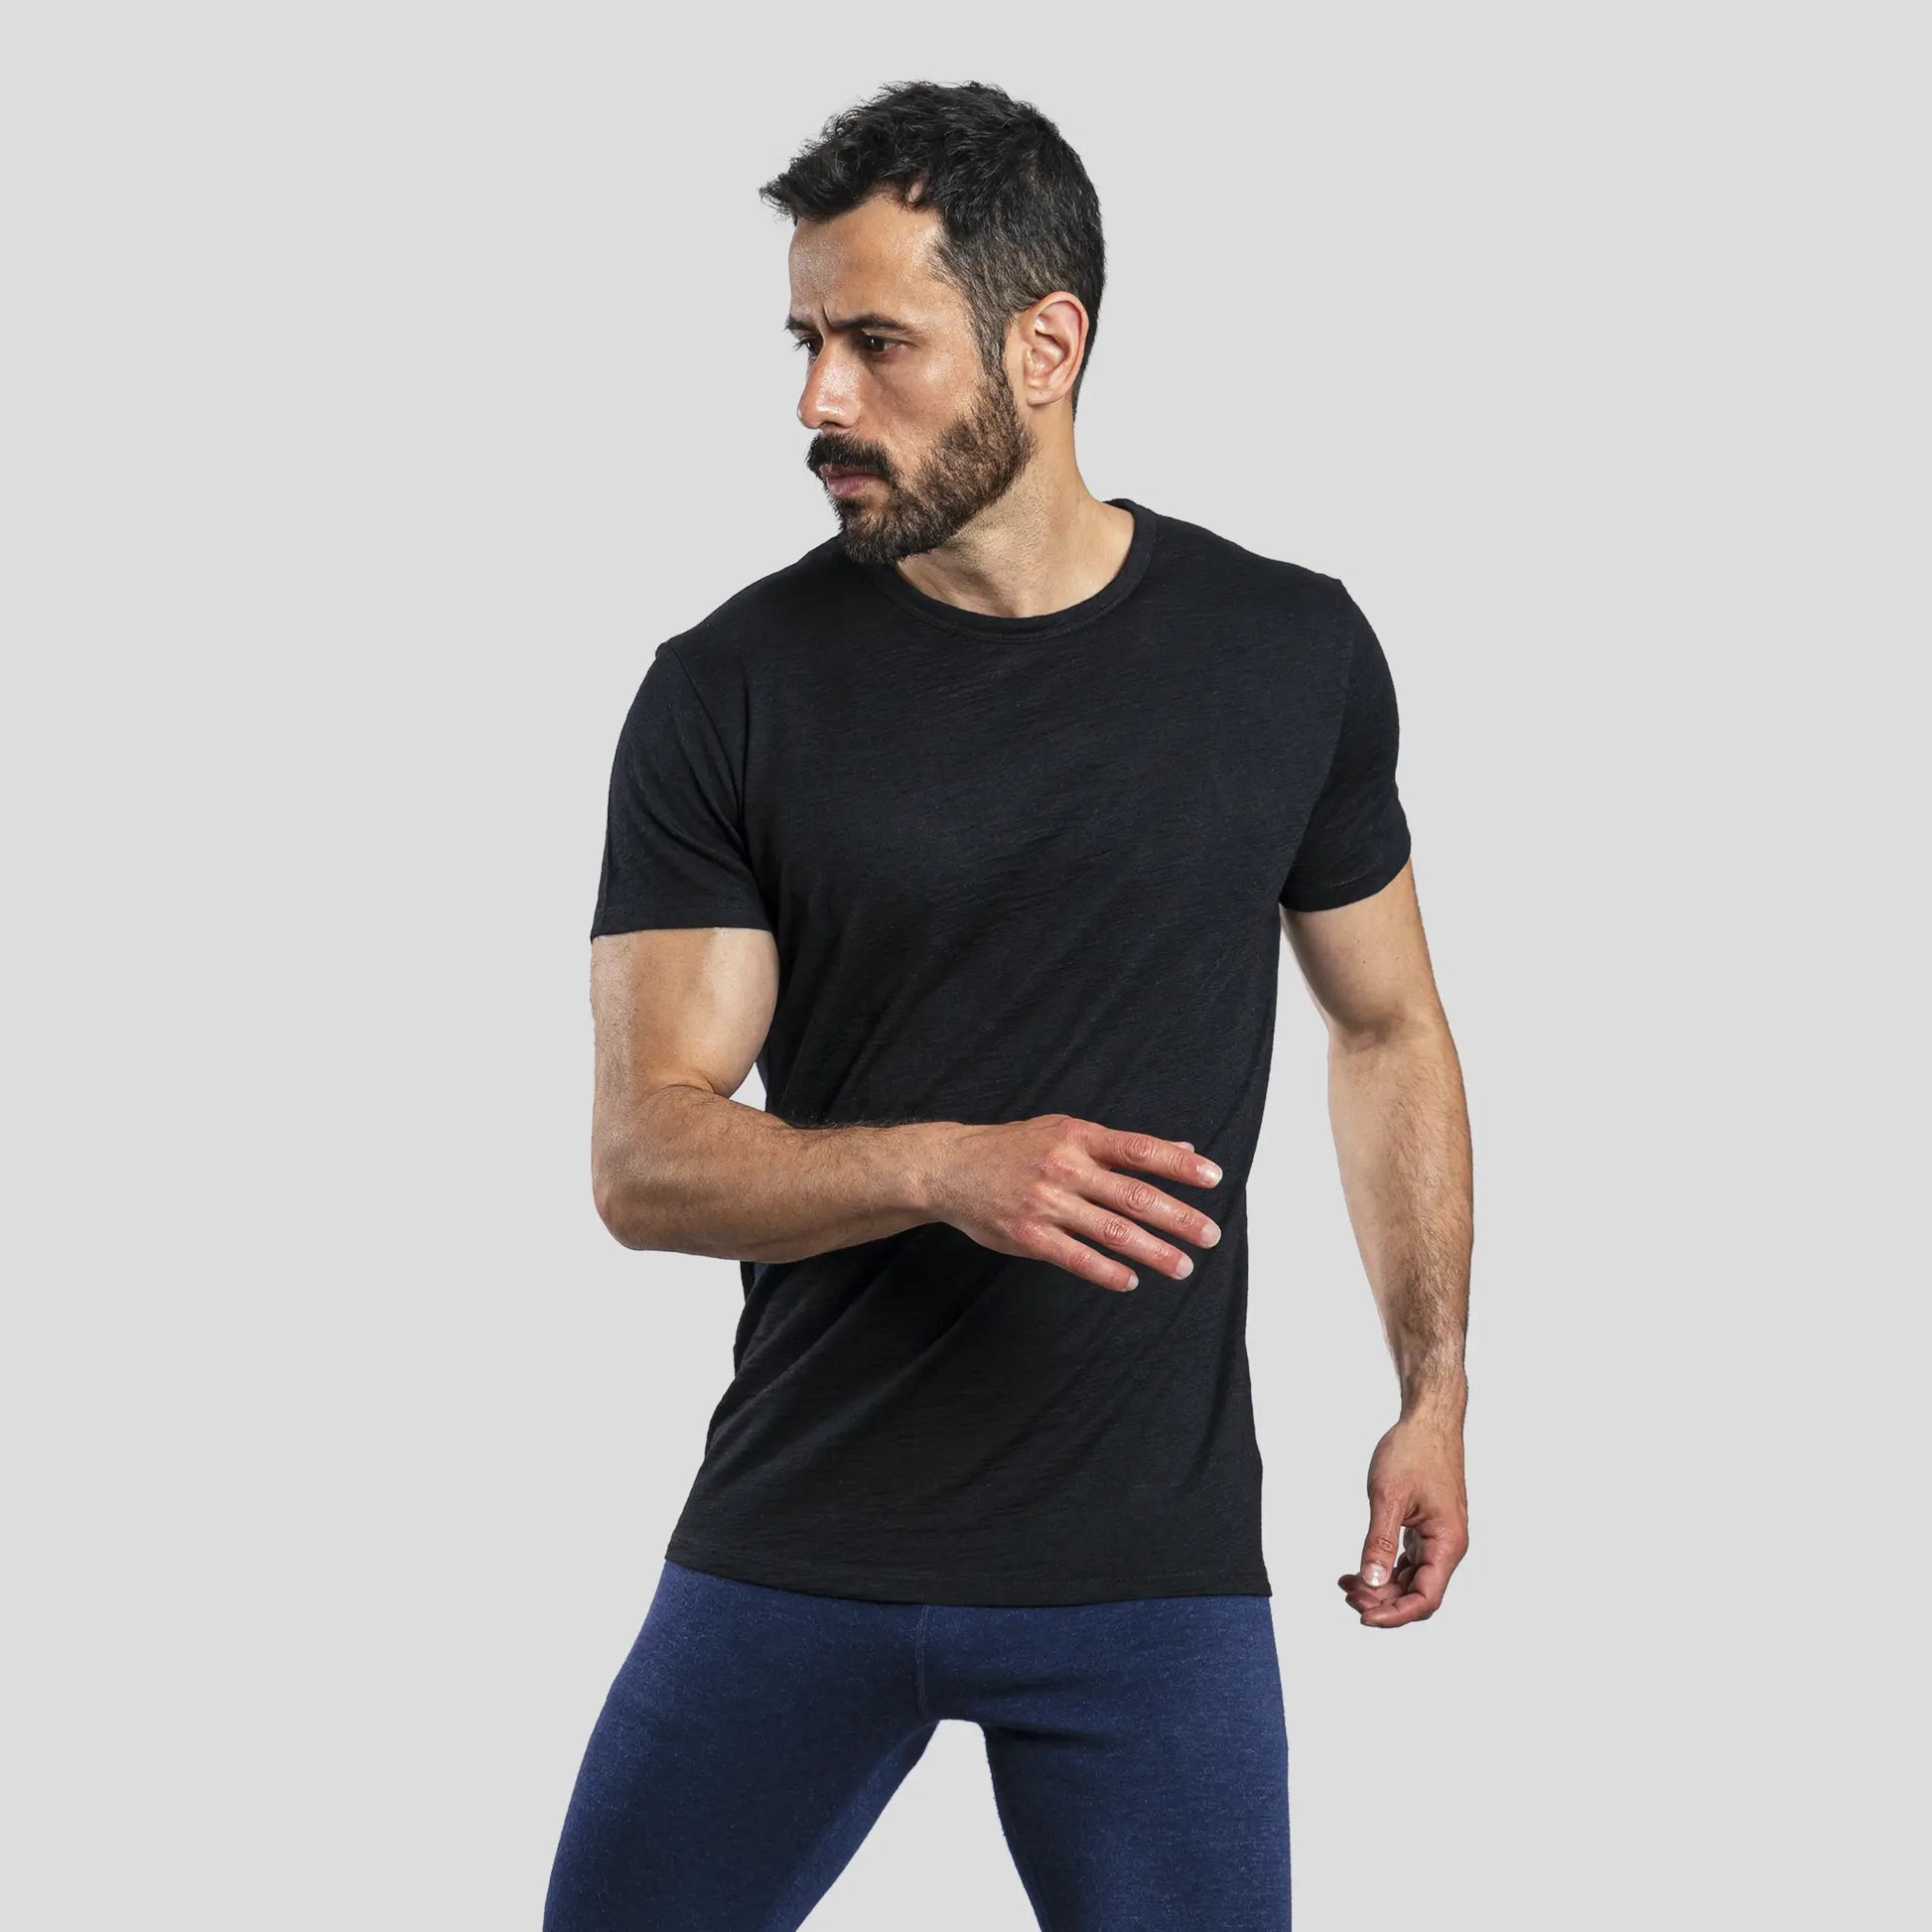 Fresh Clean Threads  Best High-Quality, Soft, Fitted T-Shirts for Men